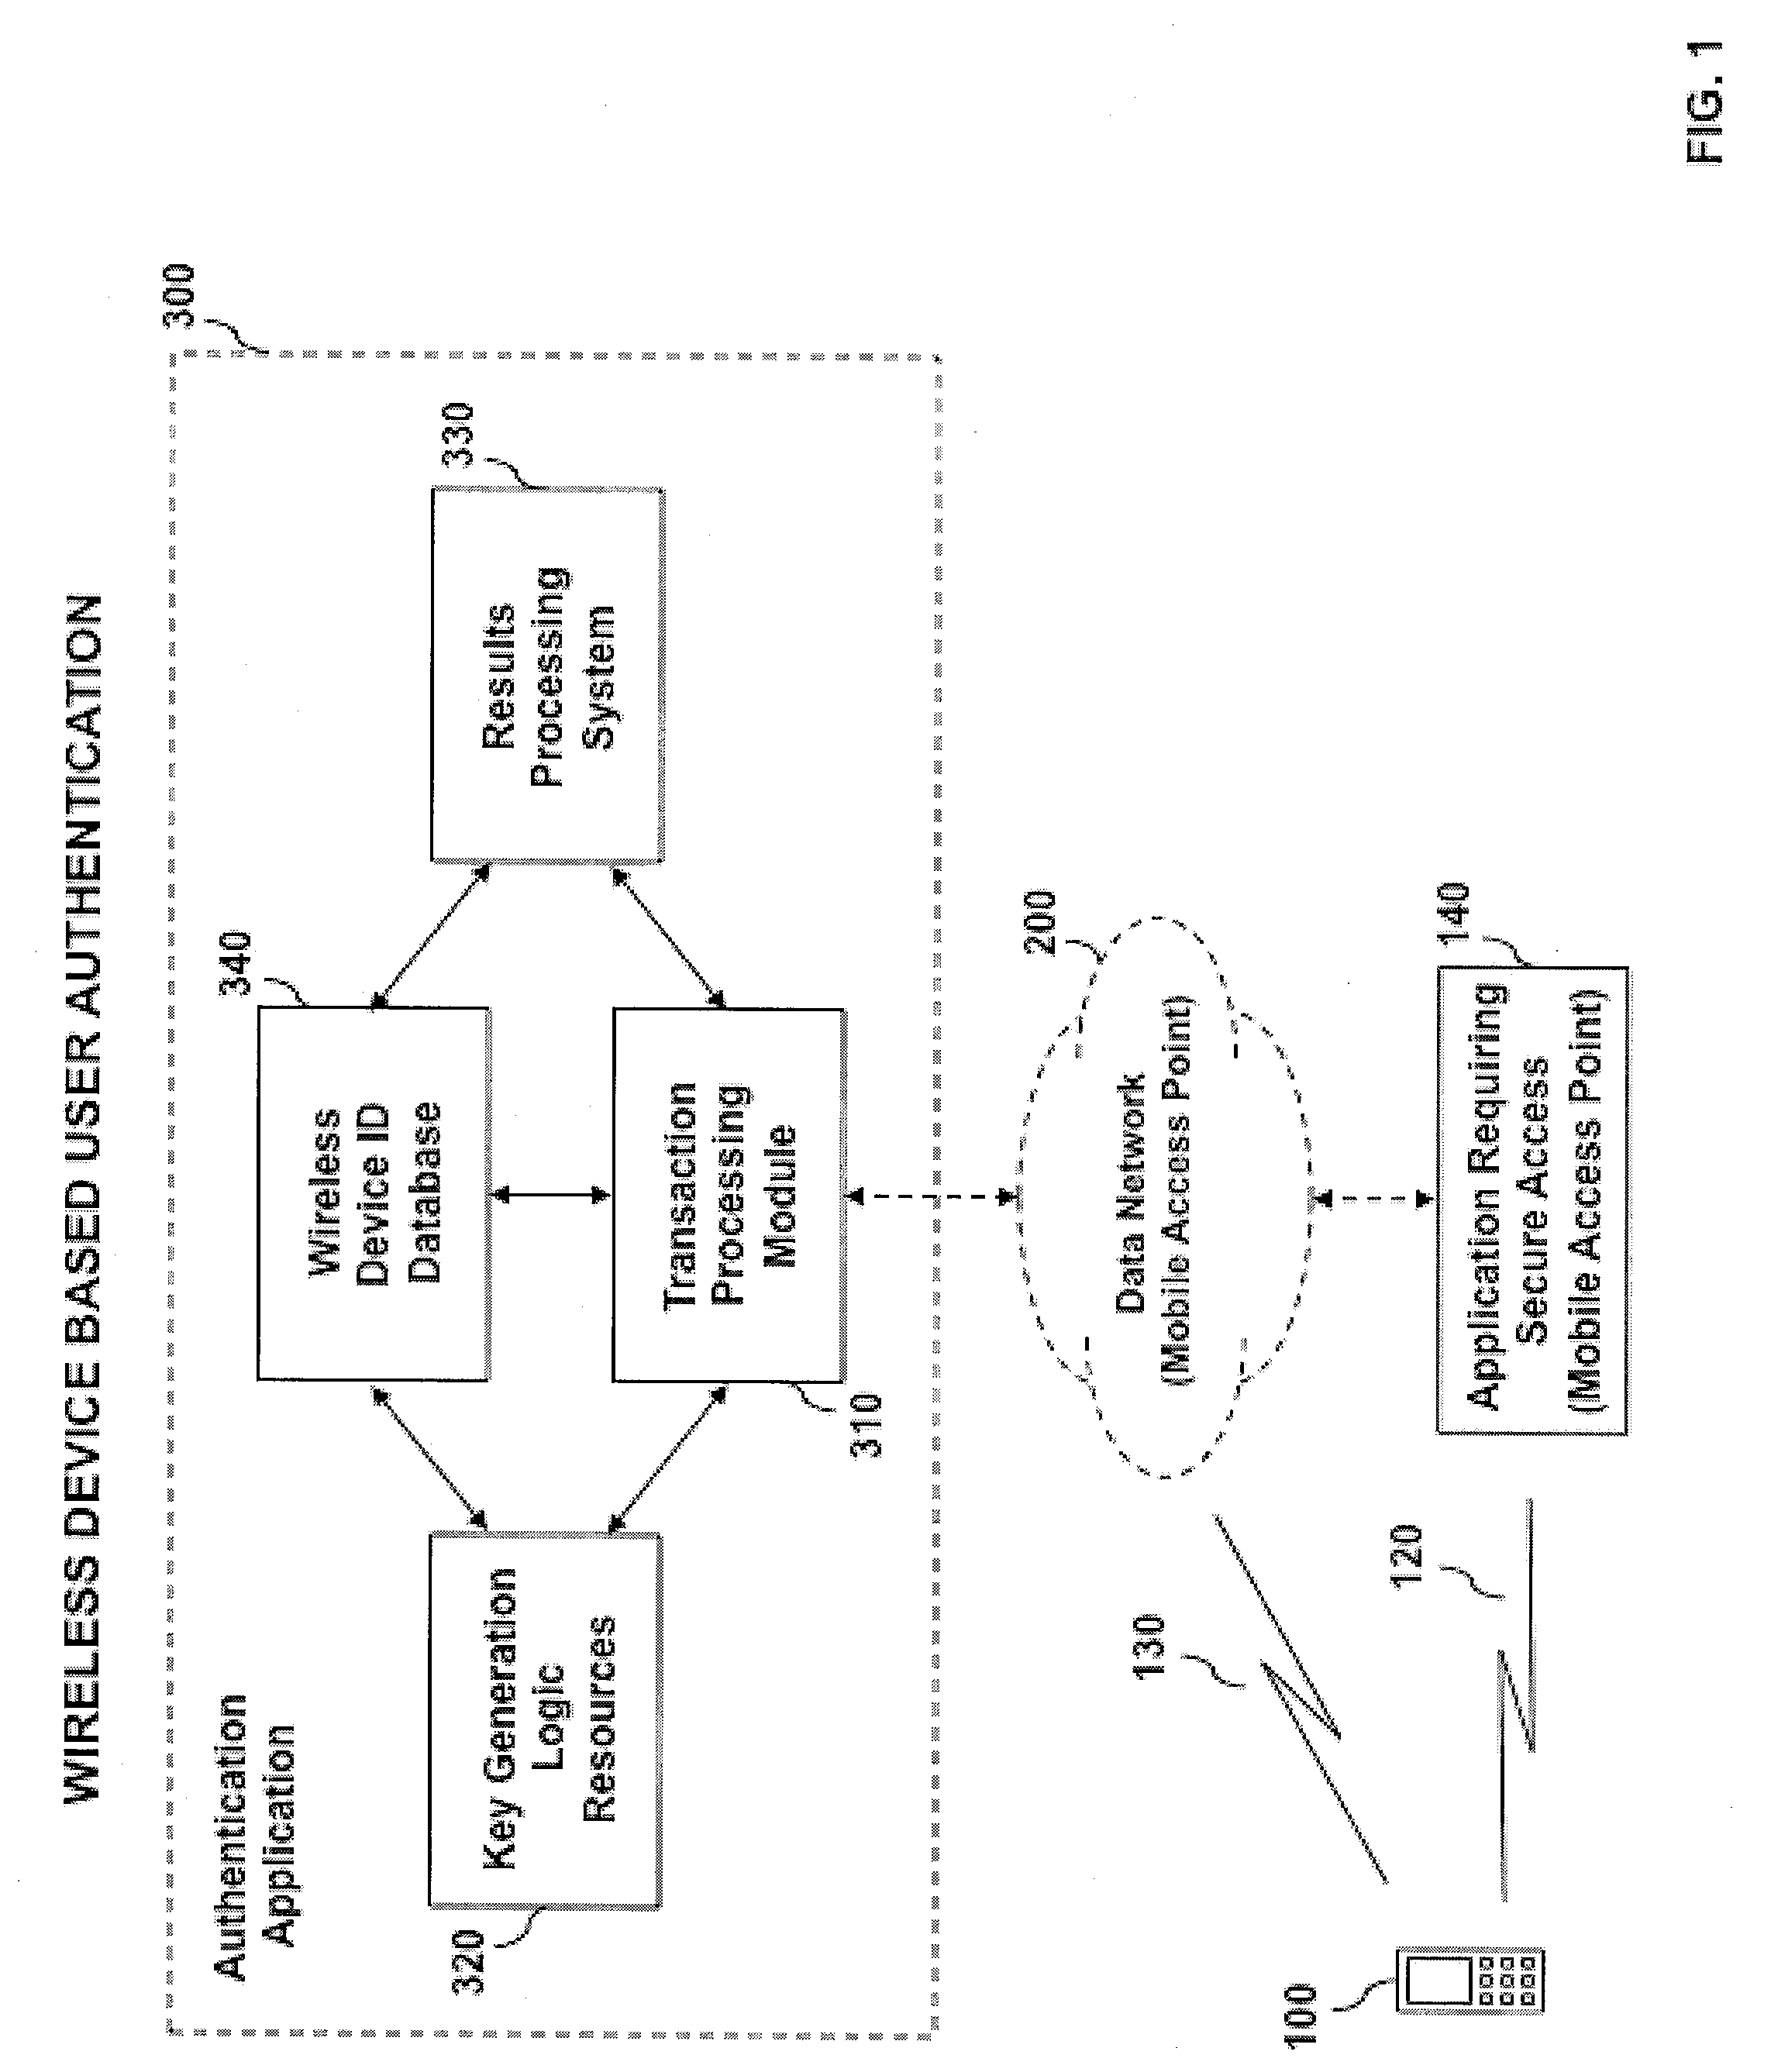 System and method for mobile identity protection for online user authentication